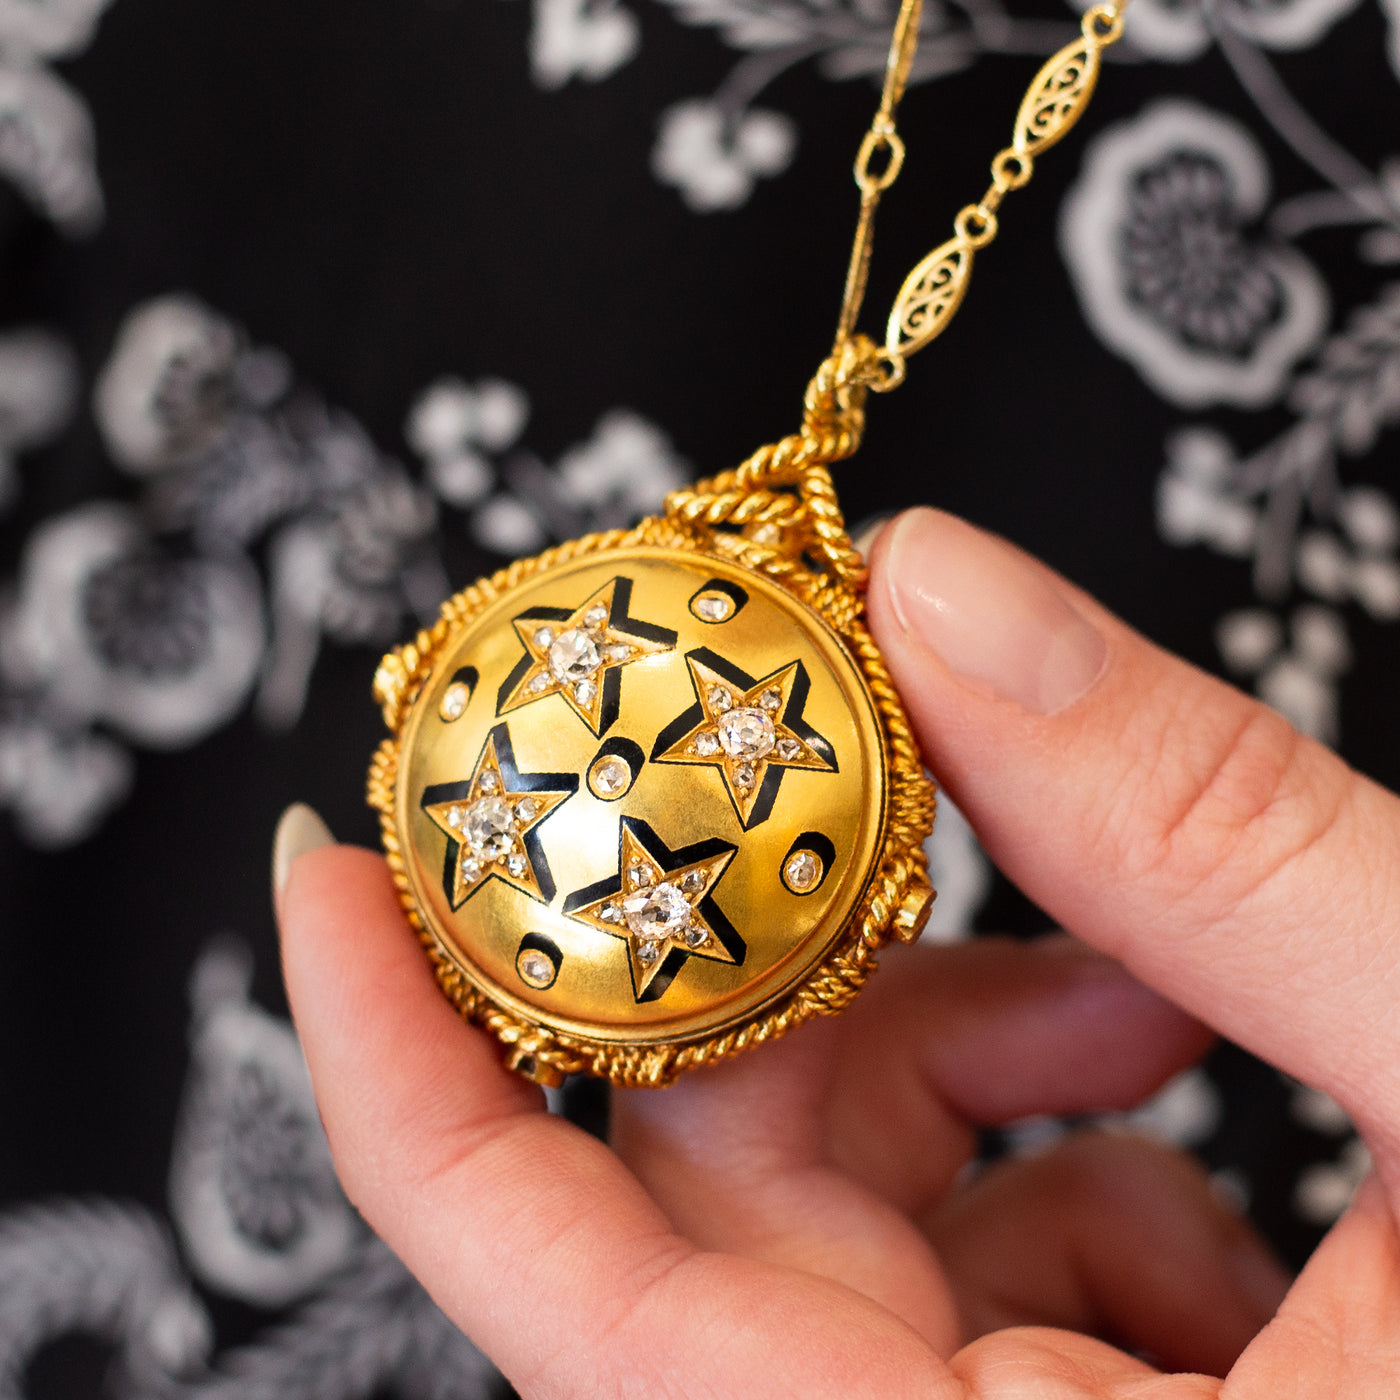 An Inside Look at Antique Lockets